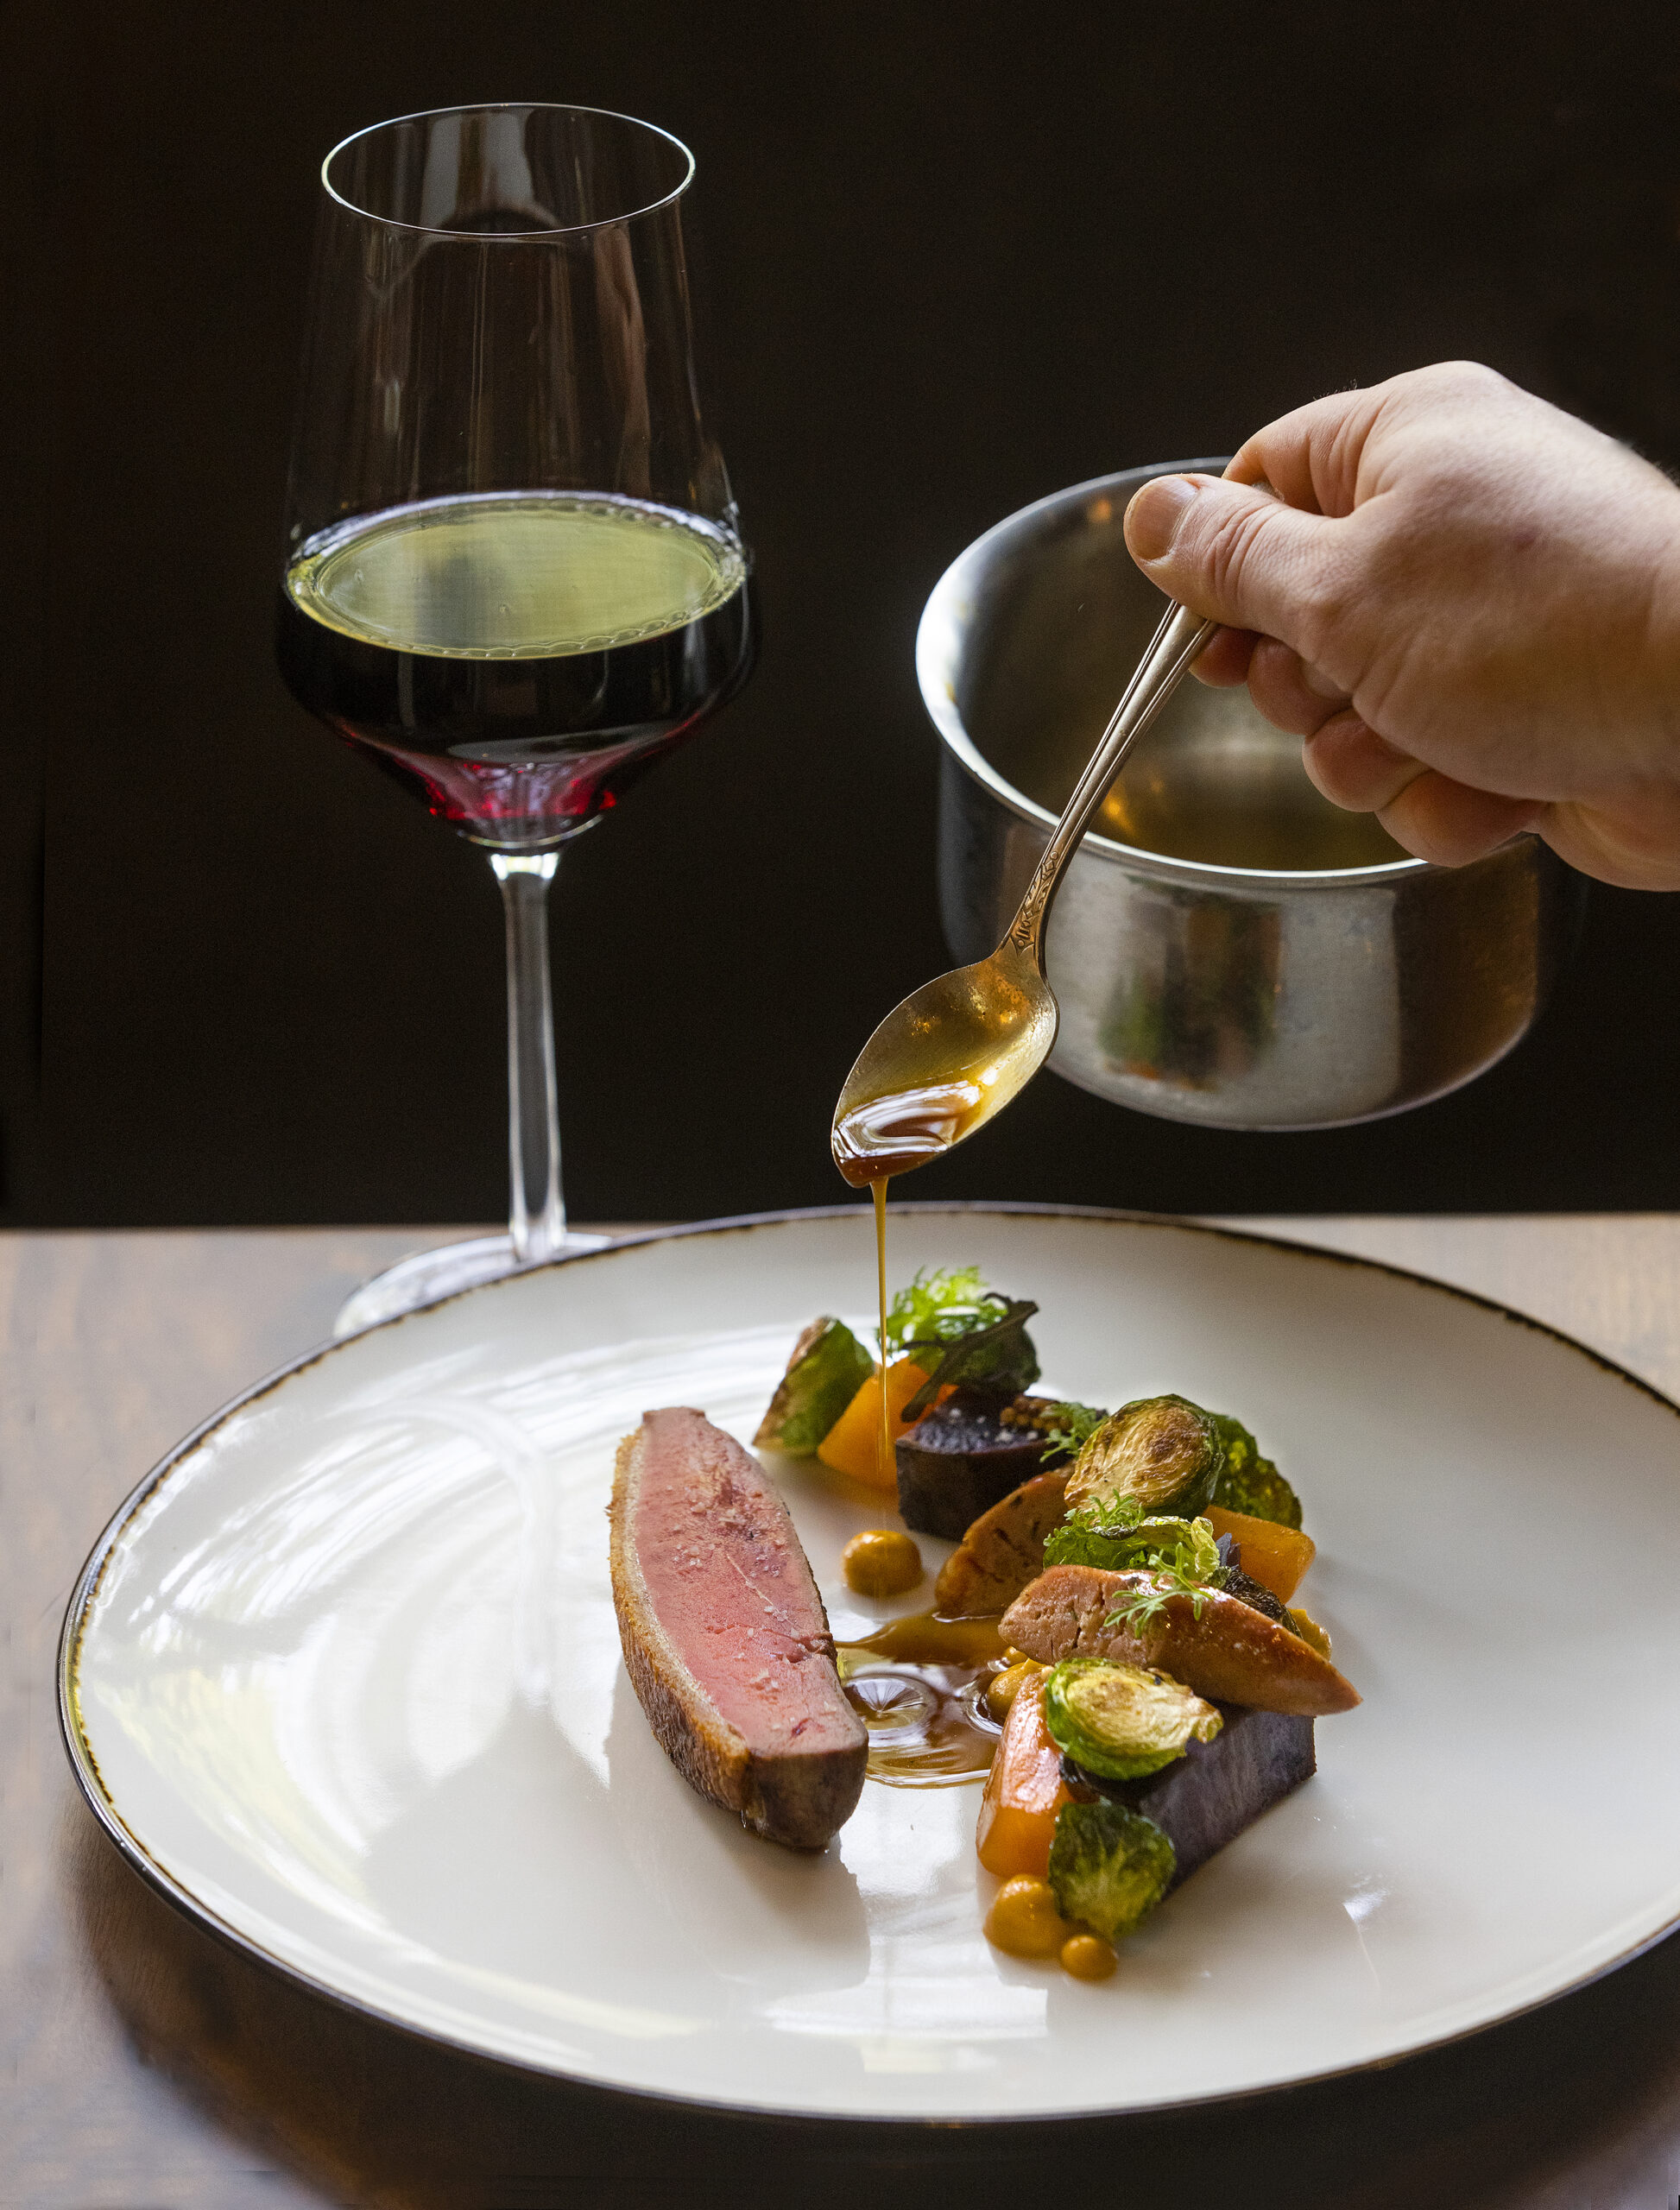 Aged Sonoma Duck with Okinawan sweet potato, persimmon and brussels sprouts from The Matheson in Healdsburg on Friday, November 5, 2021. (Photo by John Burgess/The Press Democrat)